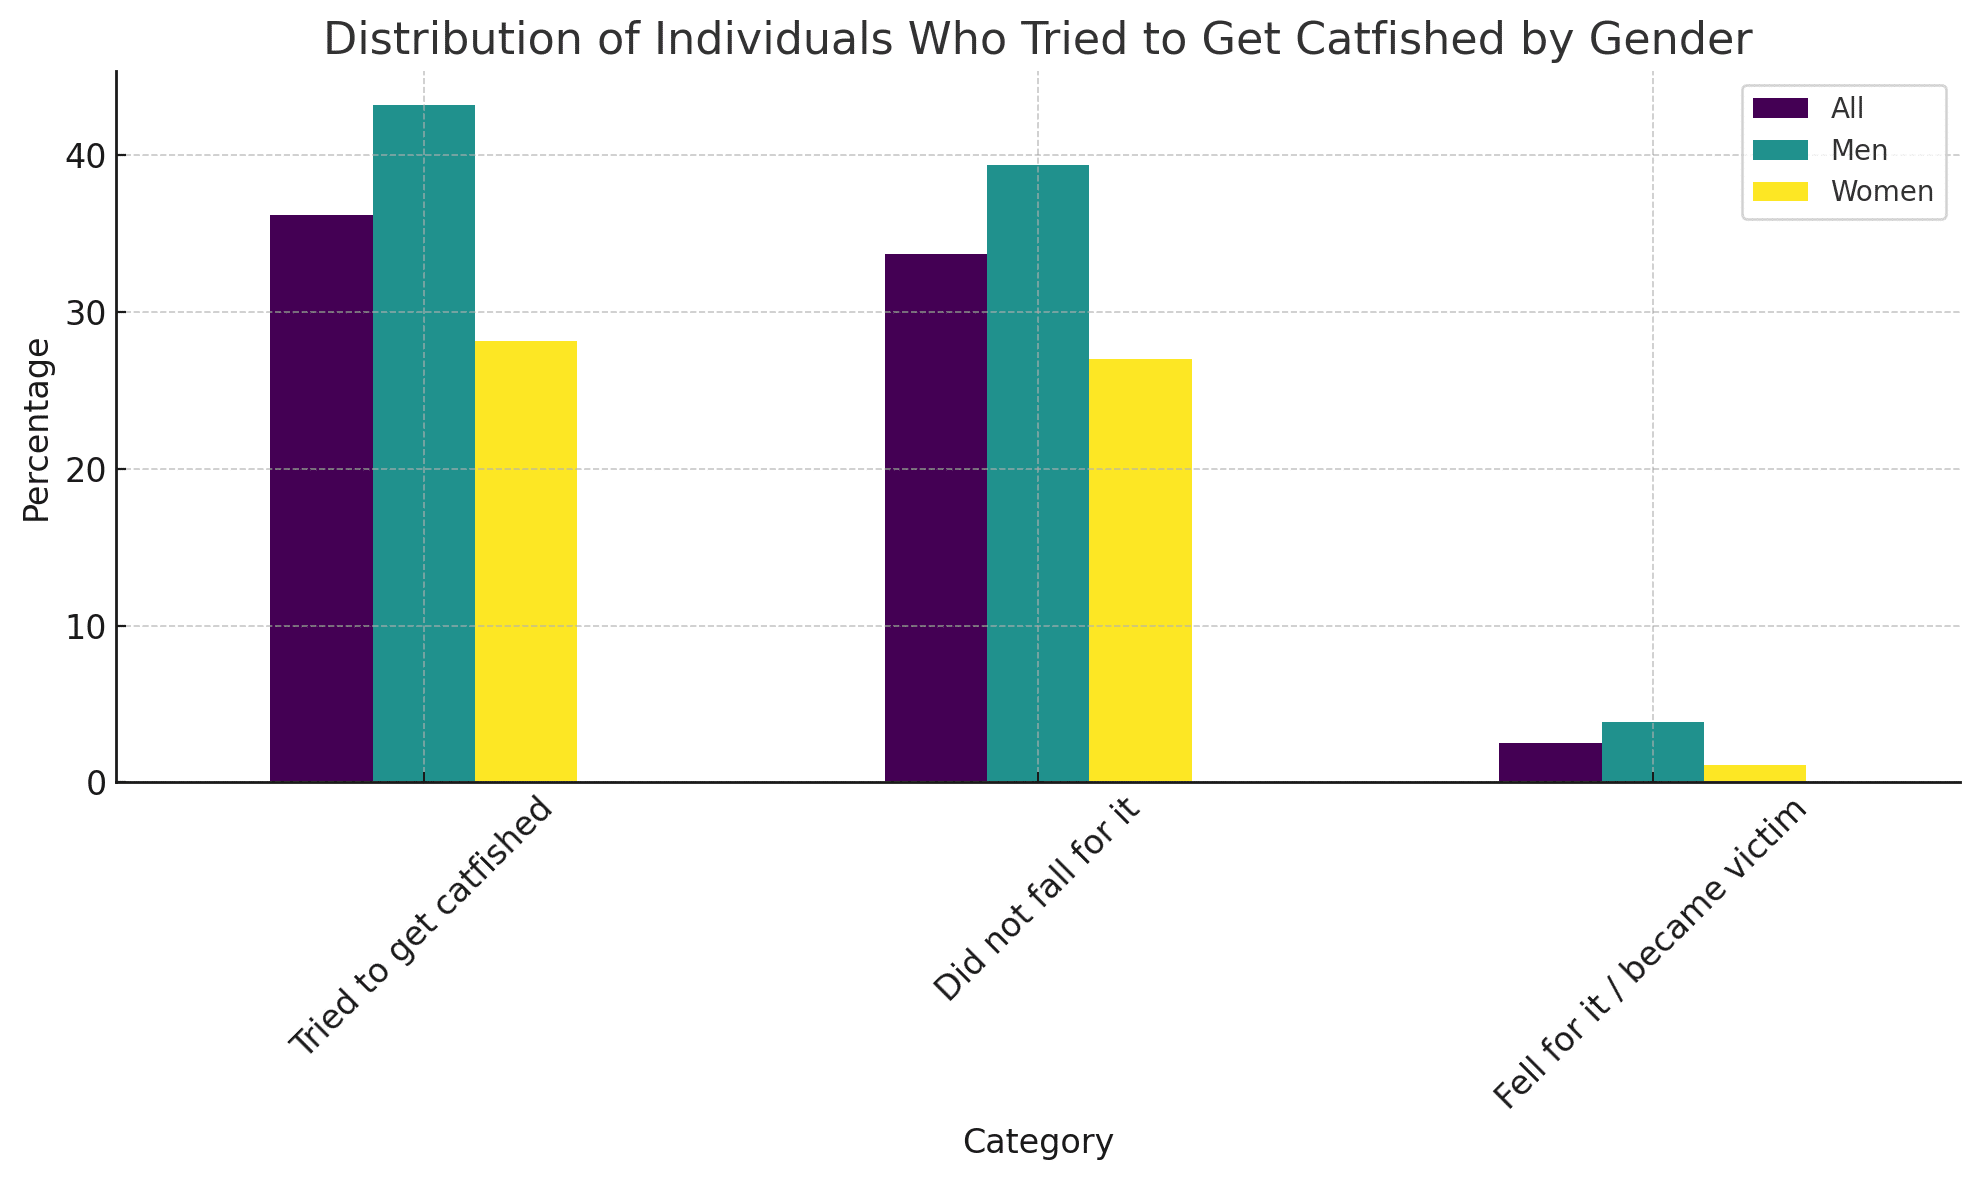 Distribution of Individuals Who Tried to Get Catfished by Gender